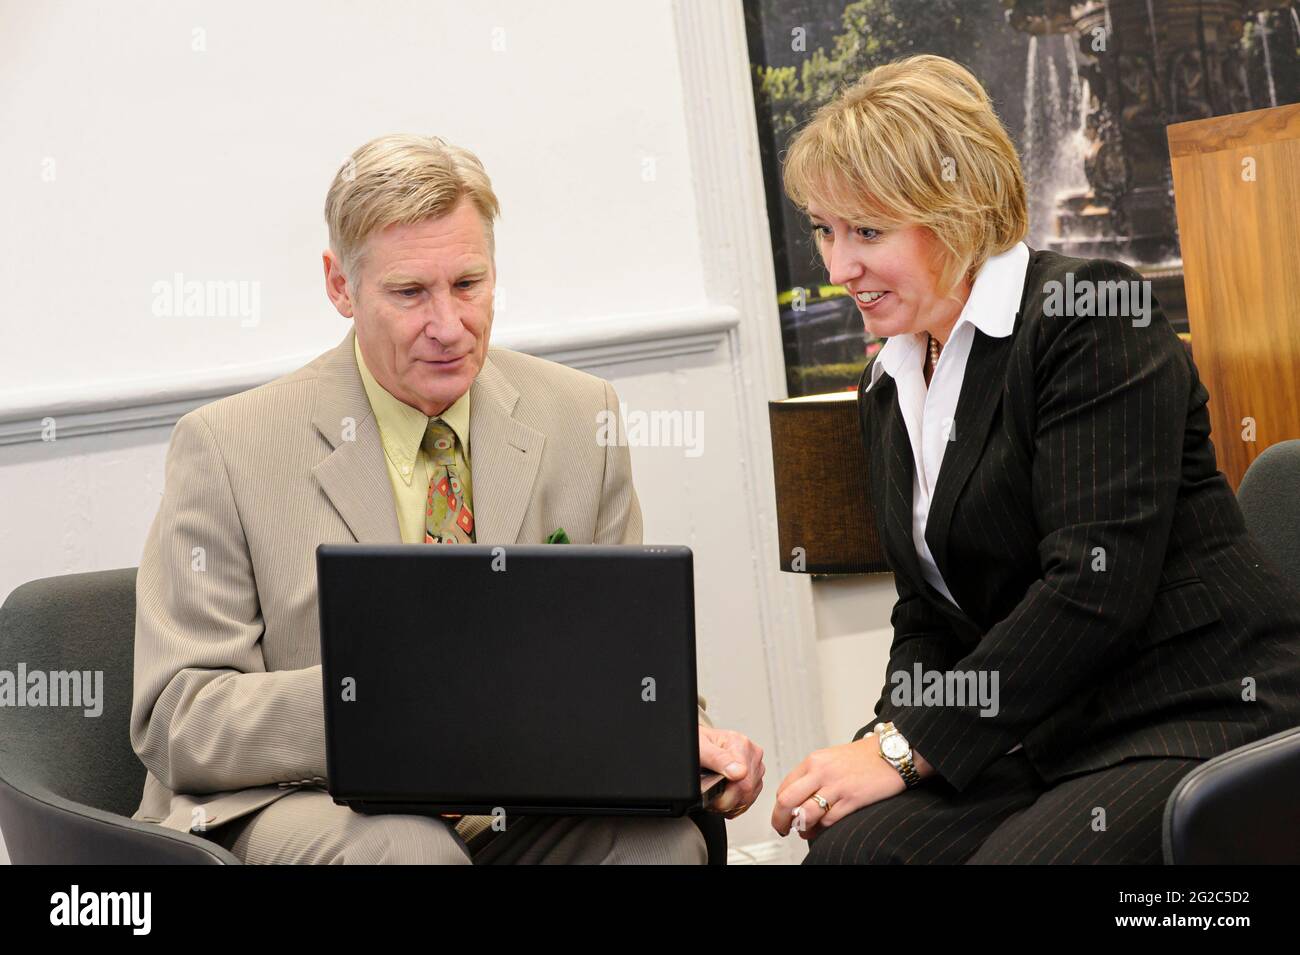 Man and woman consulting a laptop during a business meeting. Stock Photo